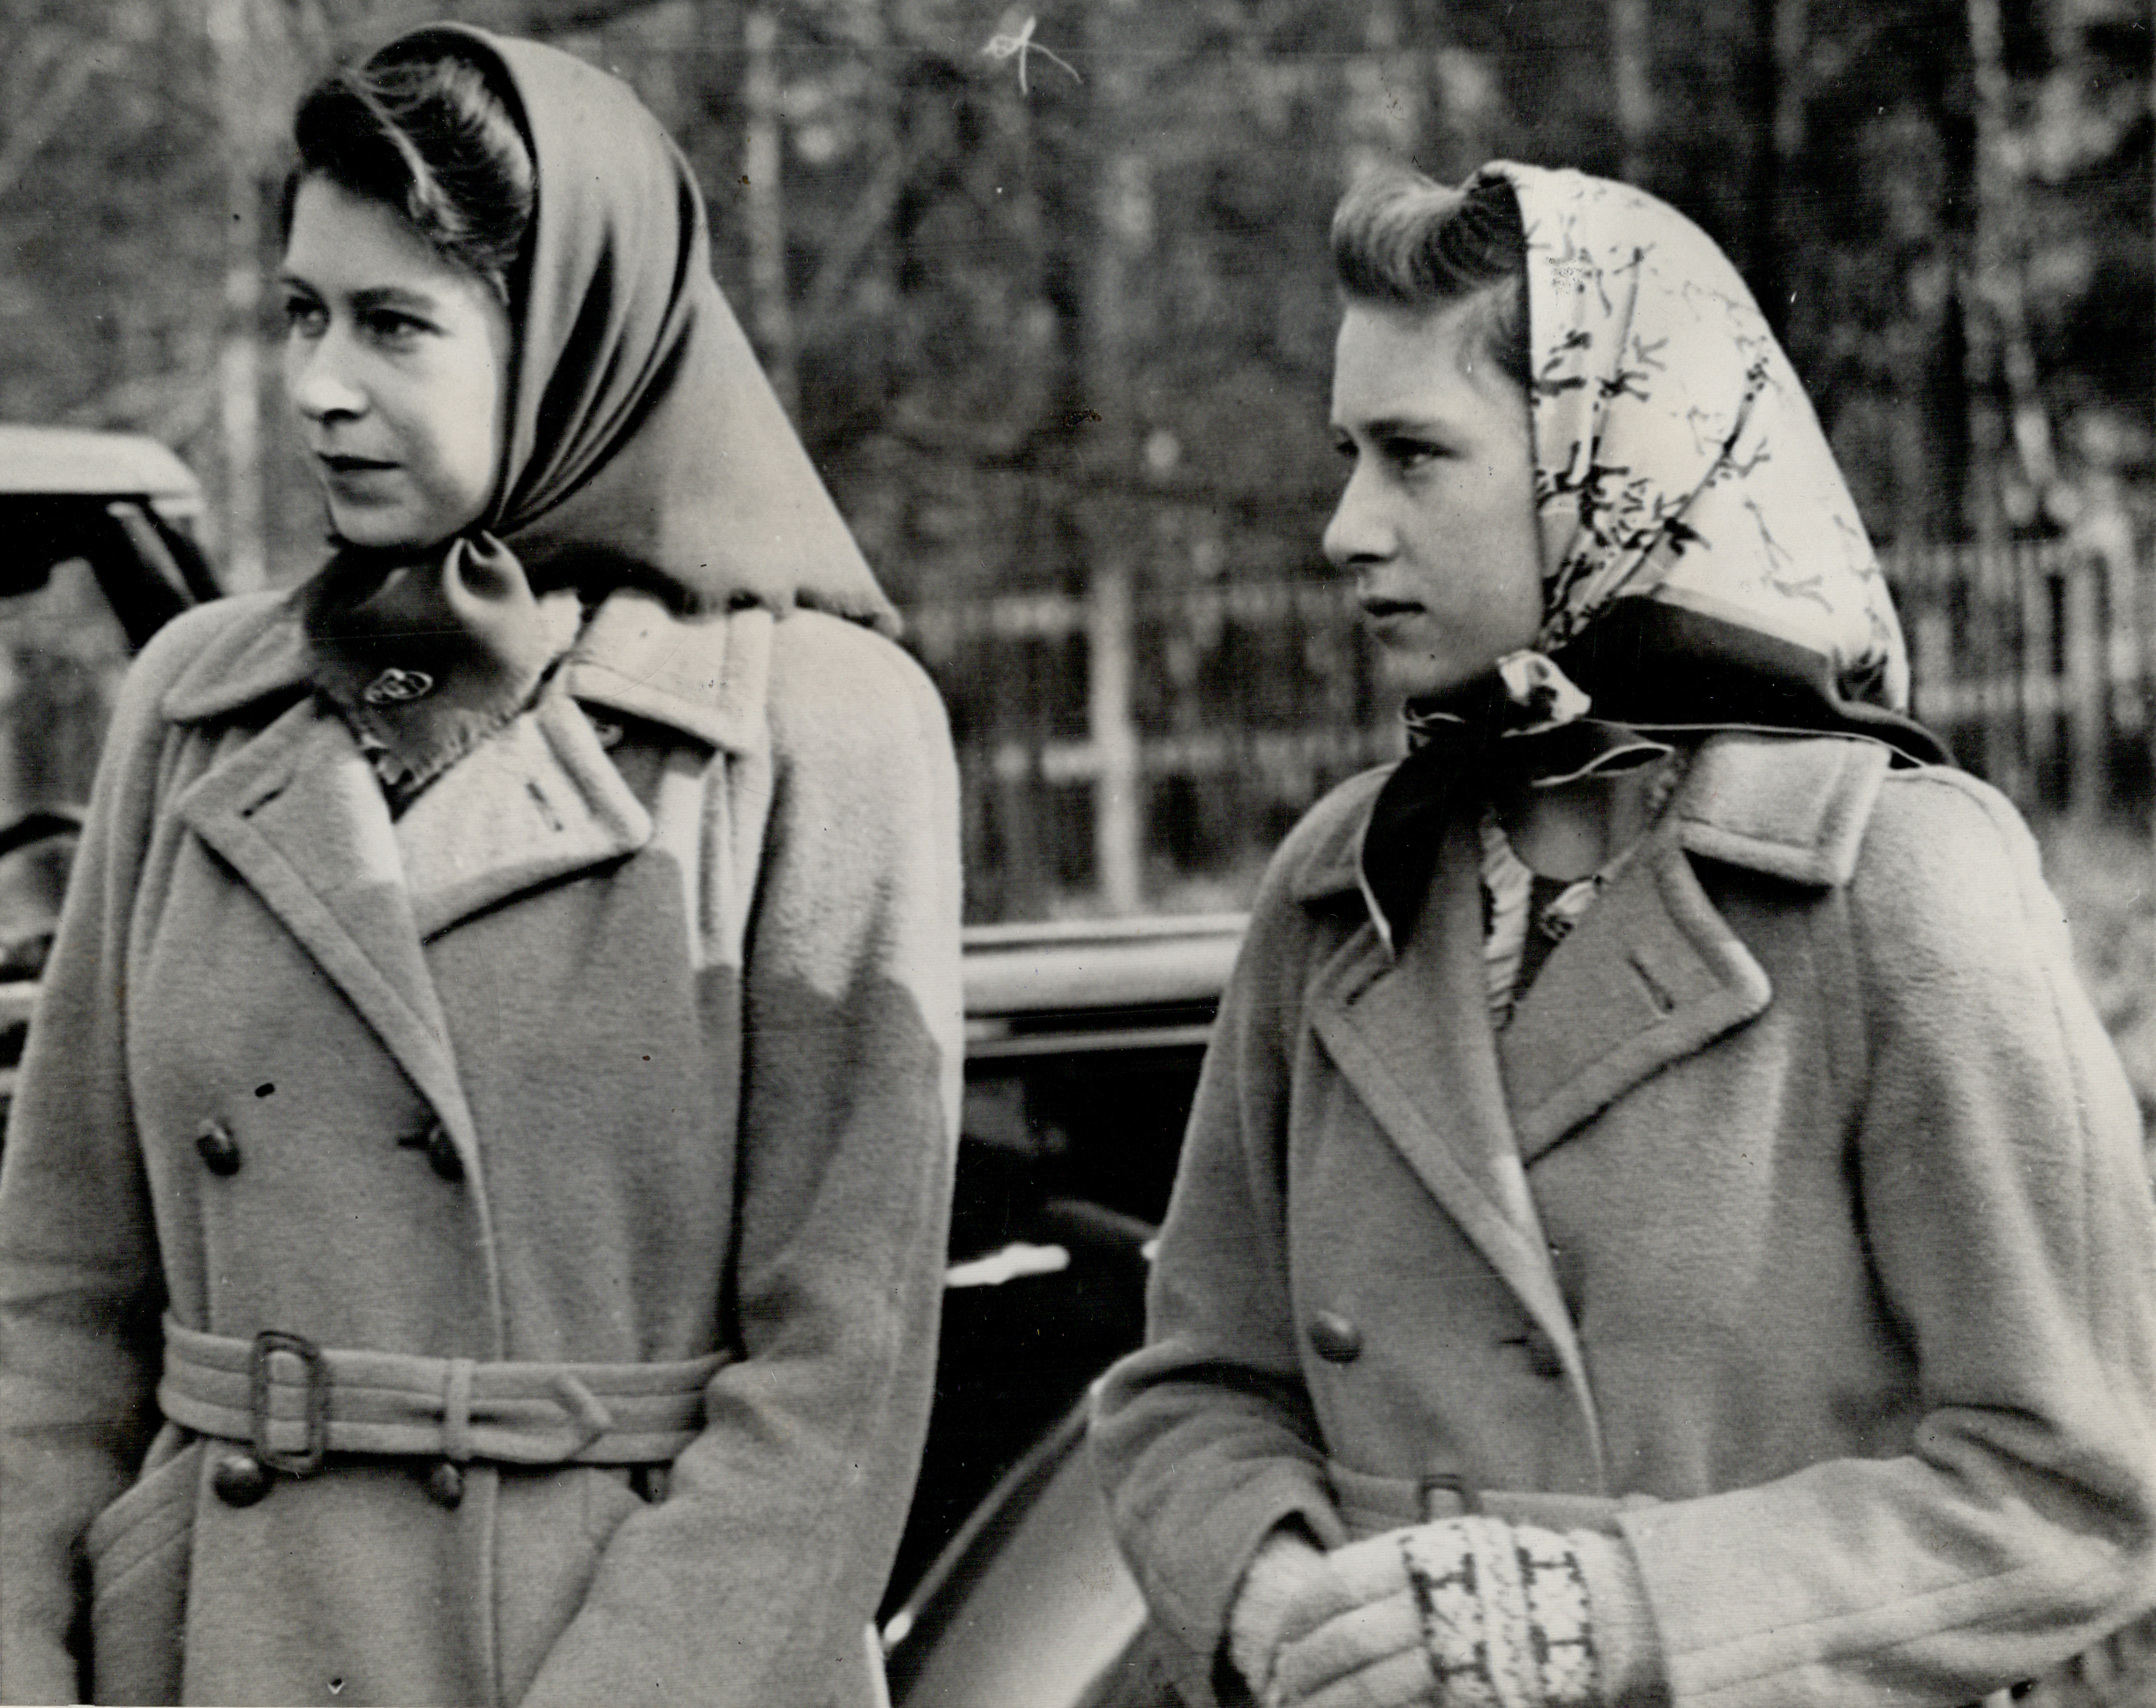 An old photo of a young Elizabeth and Margaret wearing kerchiefs on their heads and coats